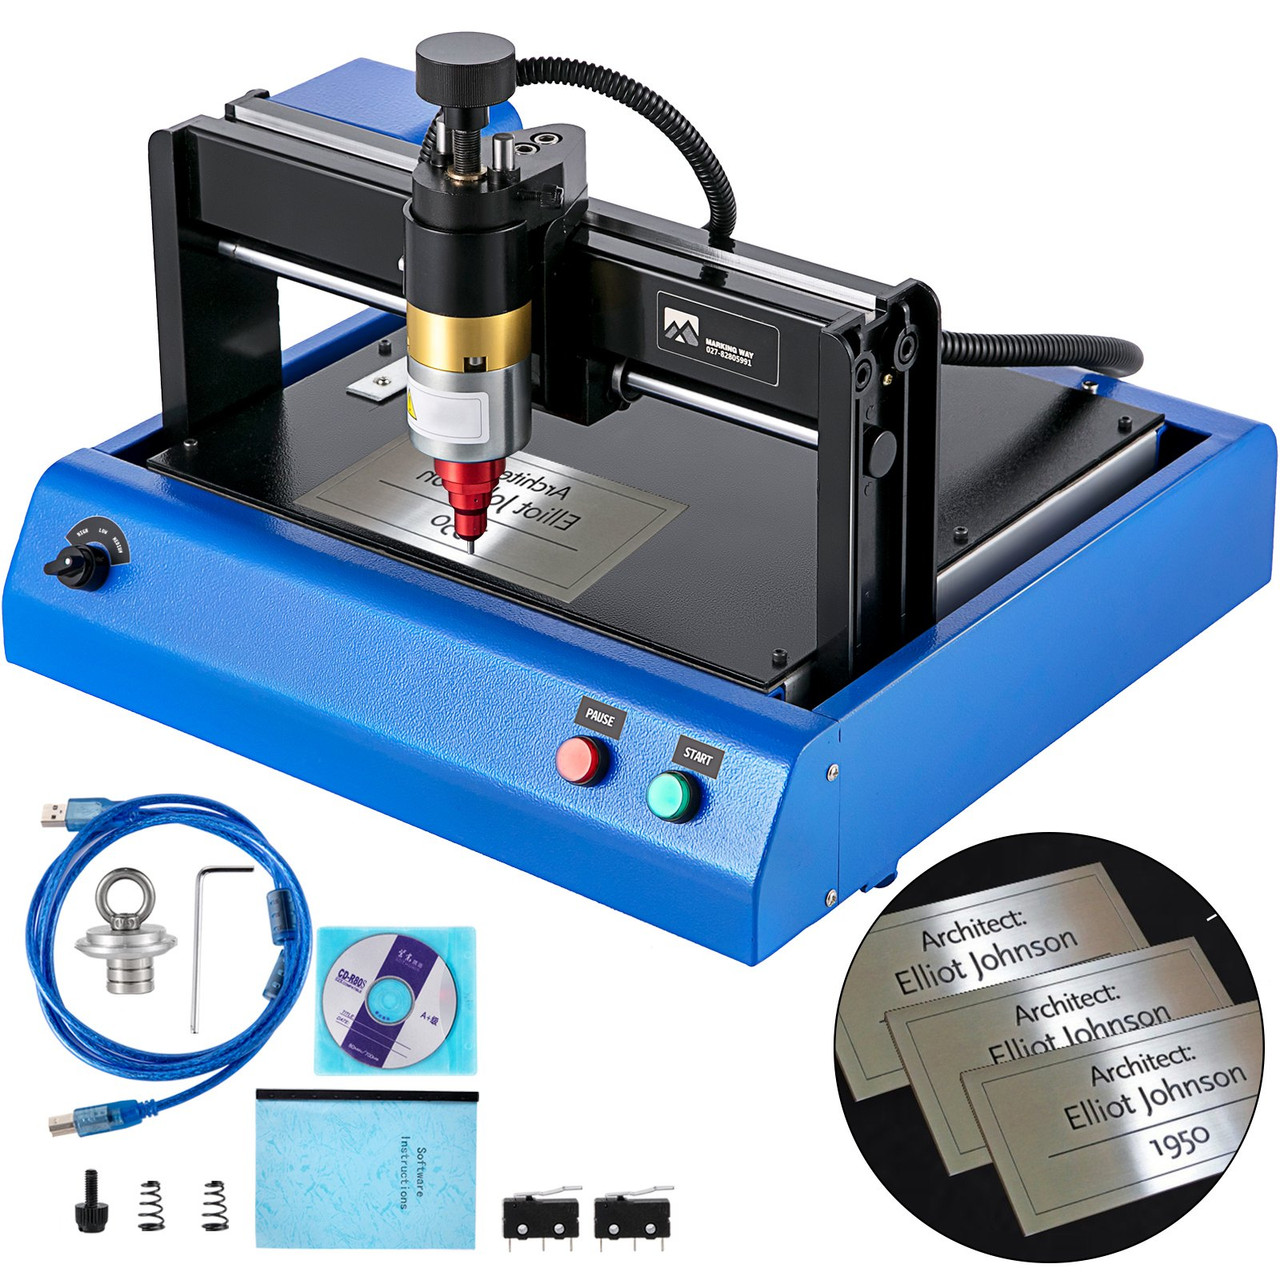 How To Make An Air Engraver From A Singer Sewing Machine  Metal engraving  tools, Metal engraving machine, Engraving tools